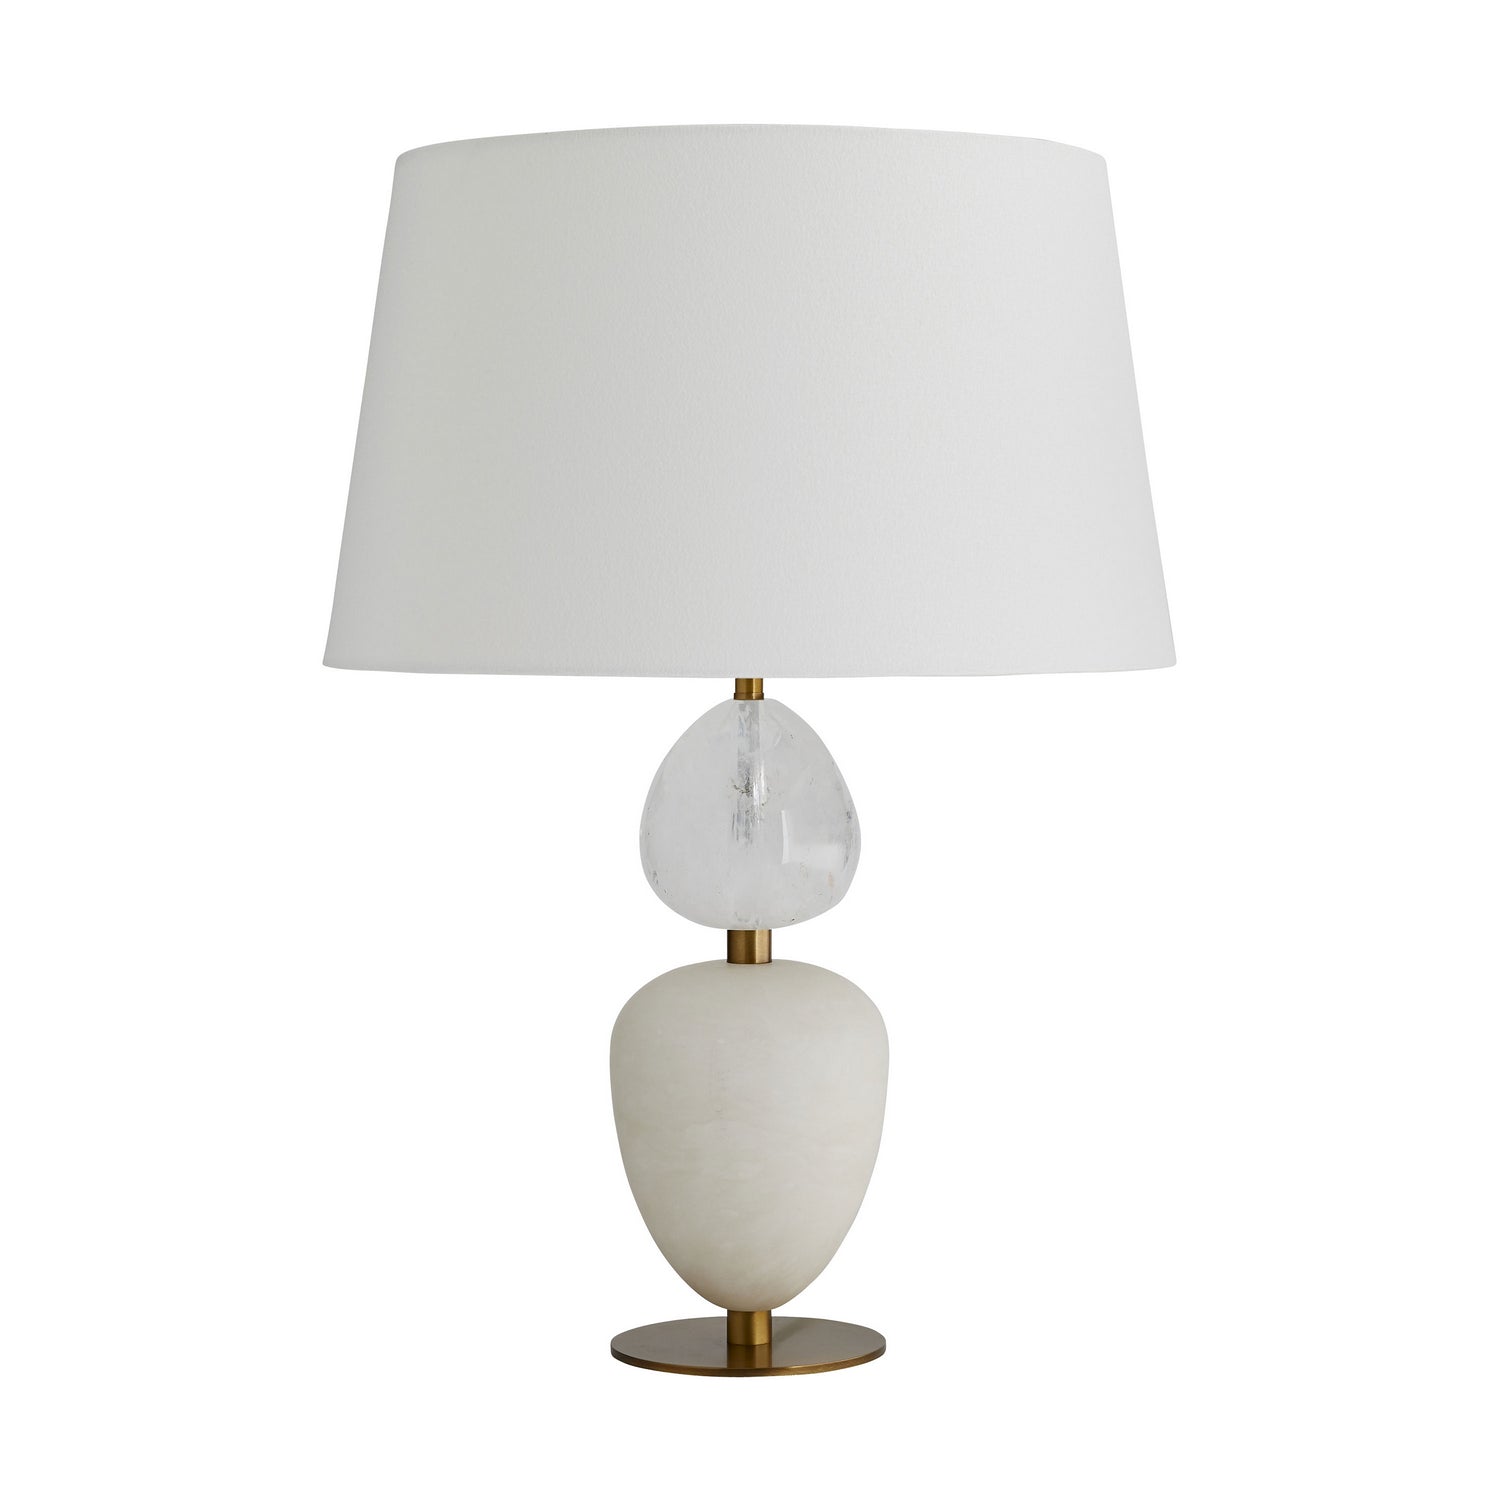 One Light Table Lamp from the Aubrey collection in White finish